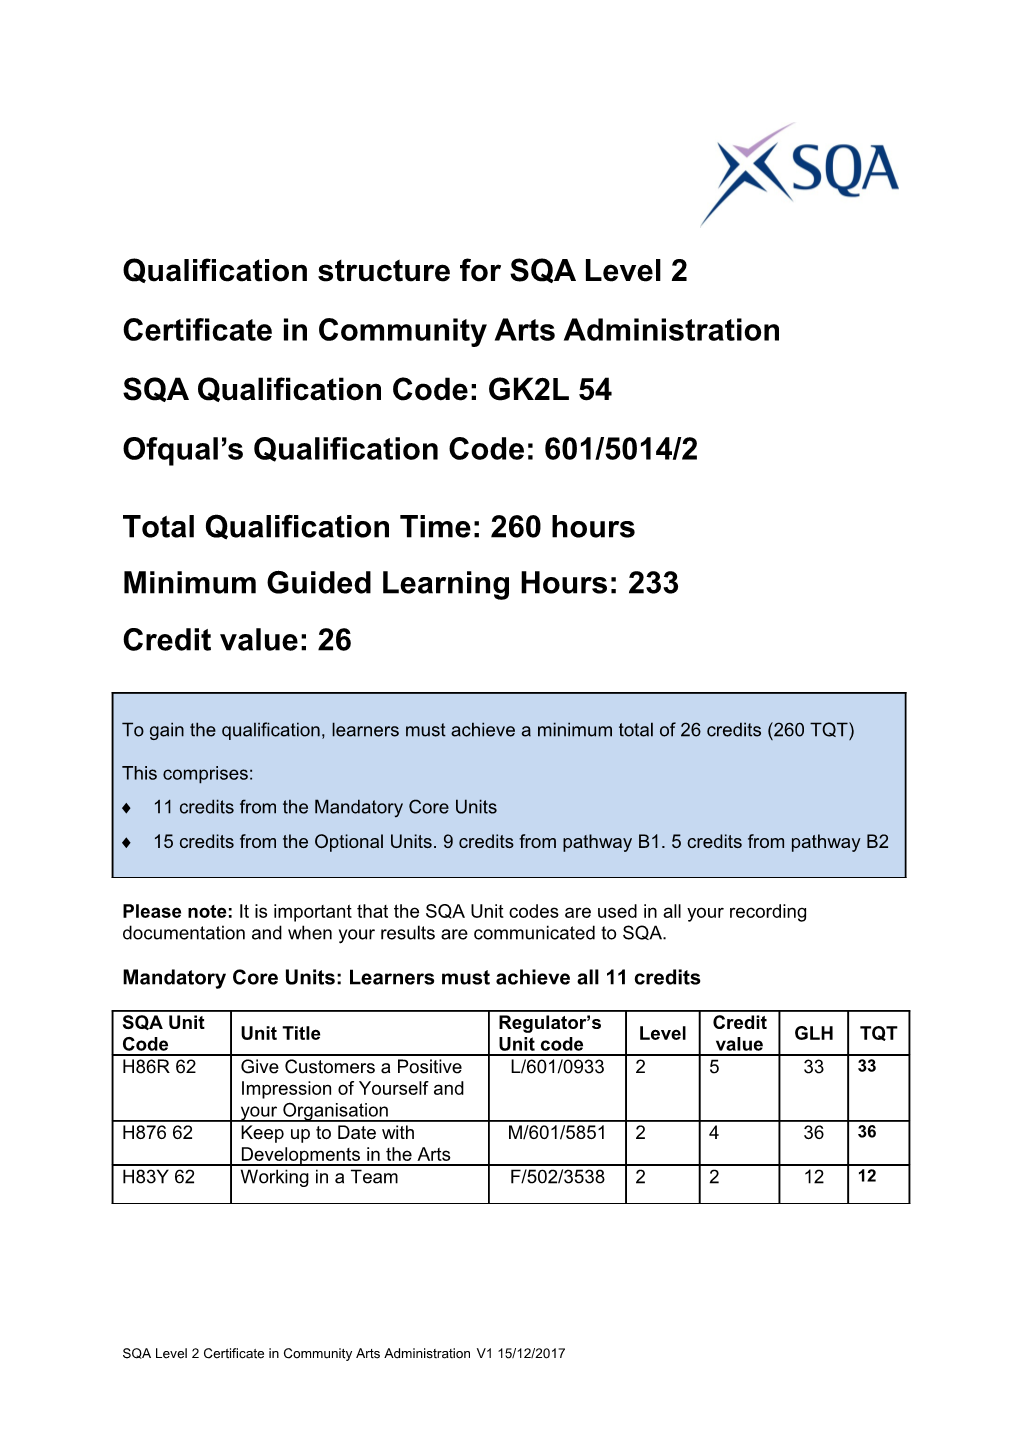 Qualification Structure for SQA Level 2